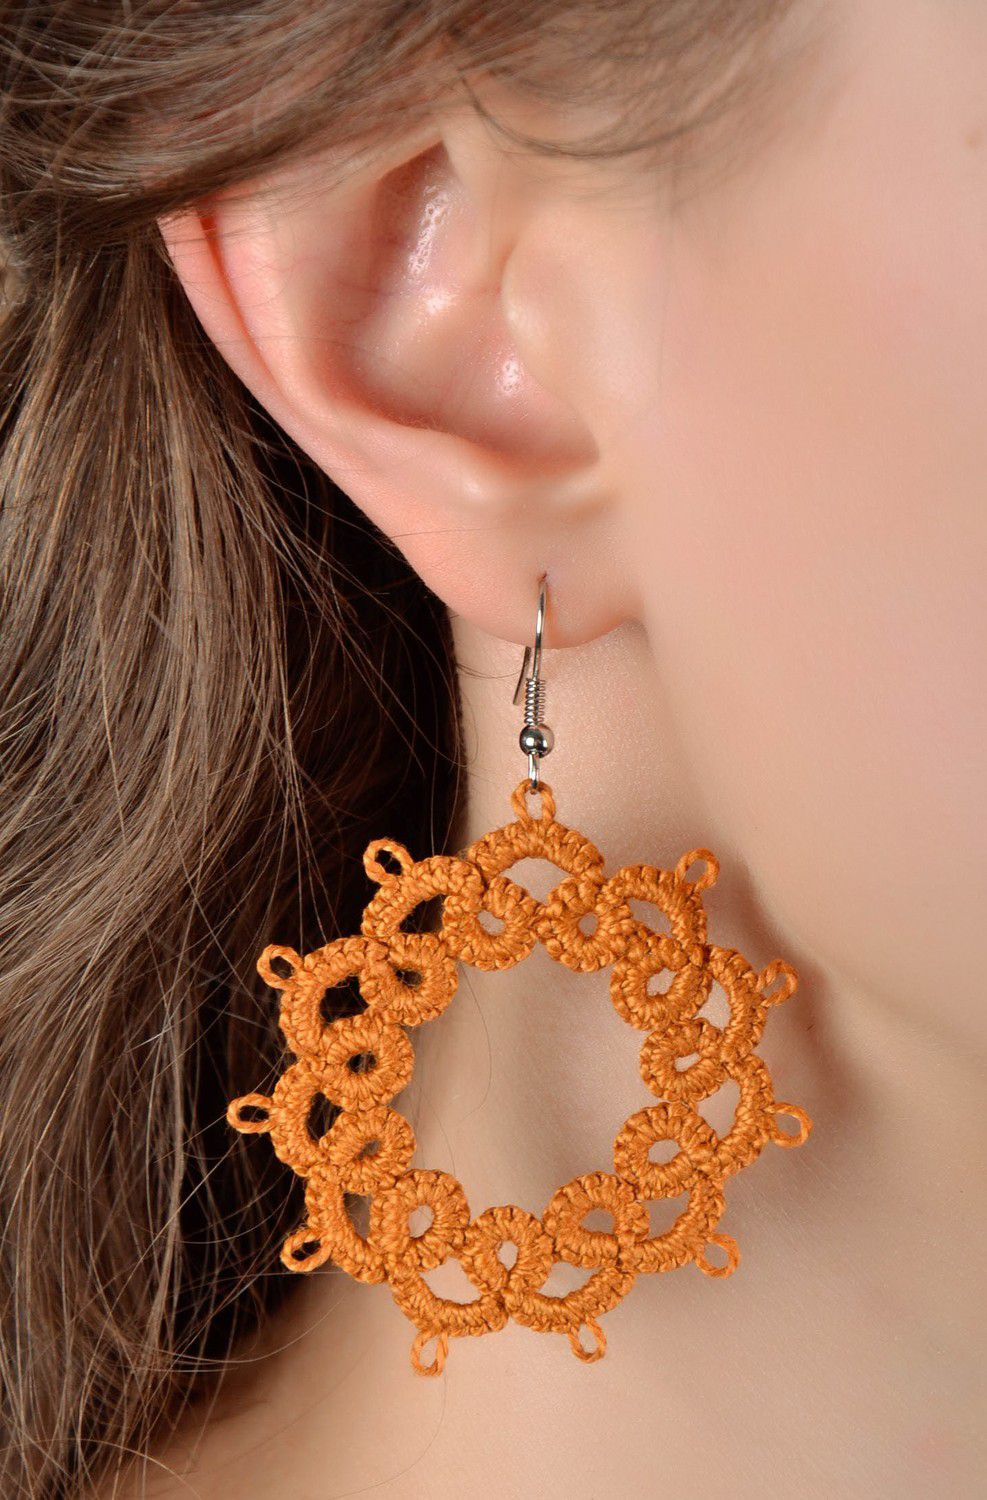 Earrings made from woven lace Little star photo 4